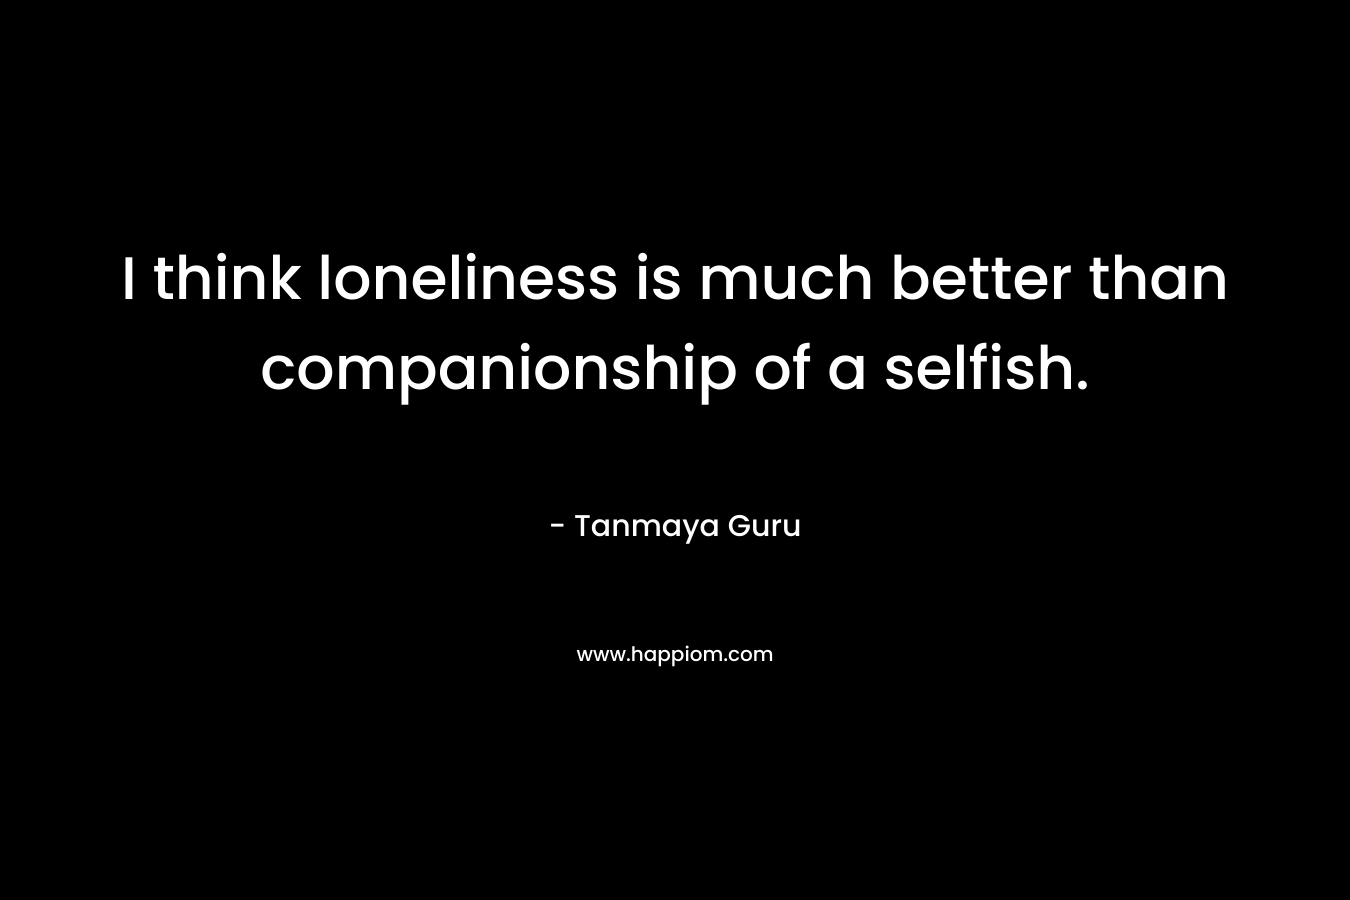 I think loneliness is much better than companionship of a selfish. – Tanmaya Guru